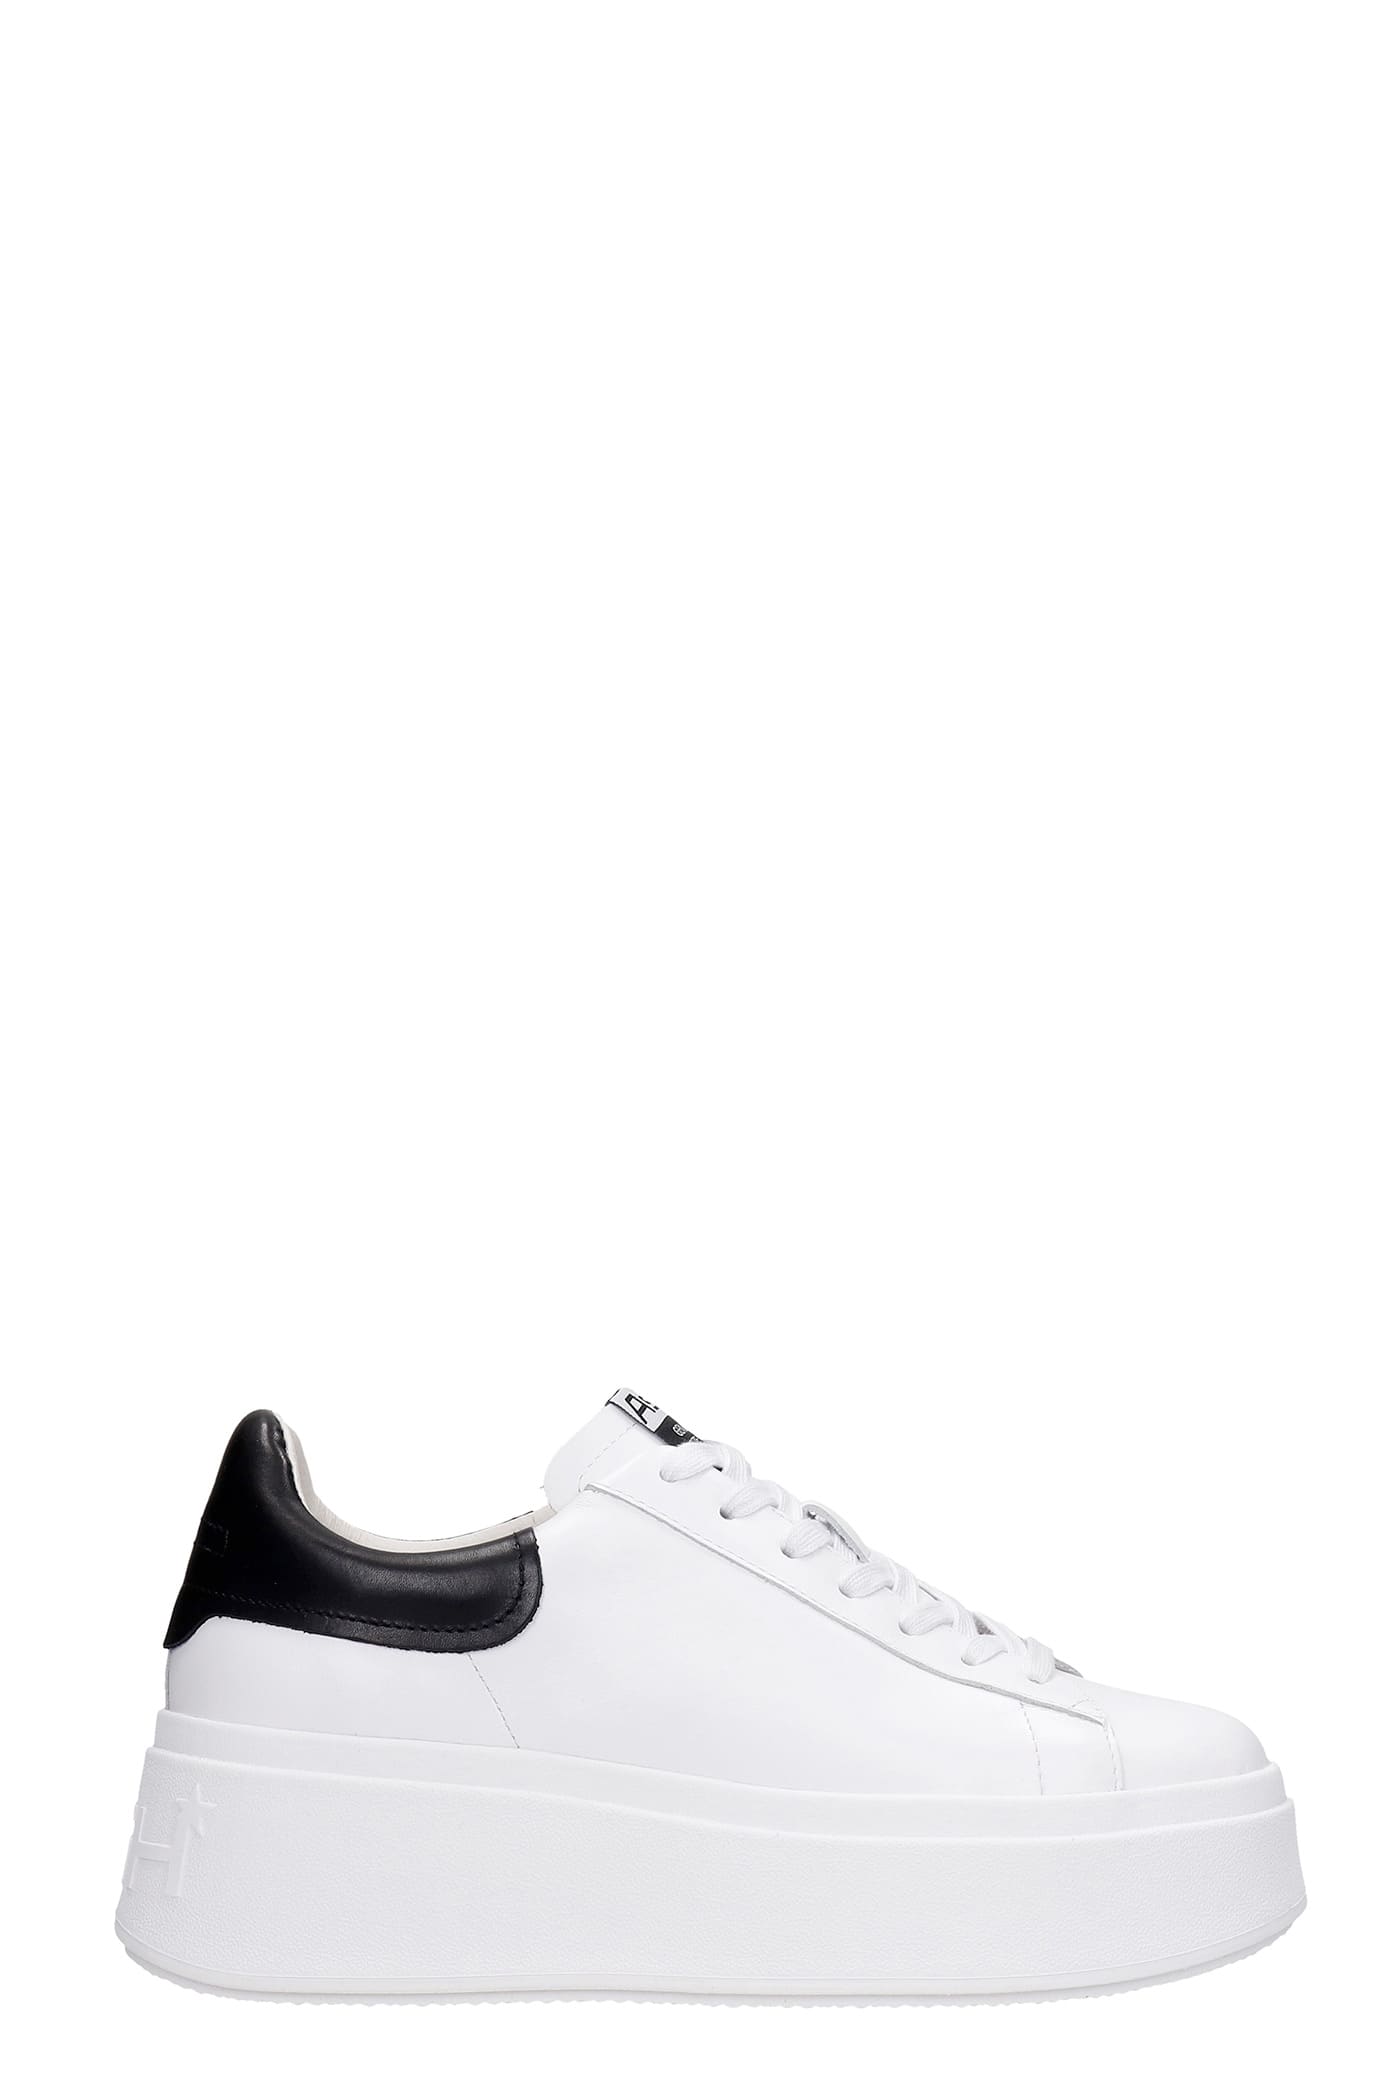 Ash Moby 06 Sneakers In White Leather